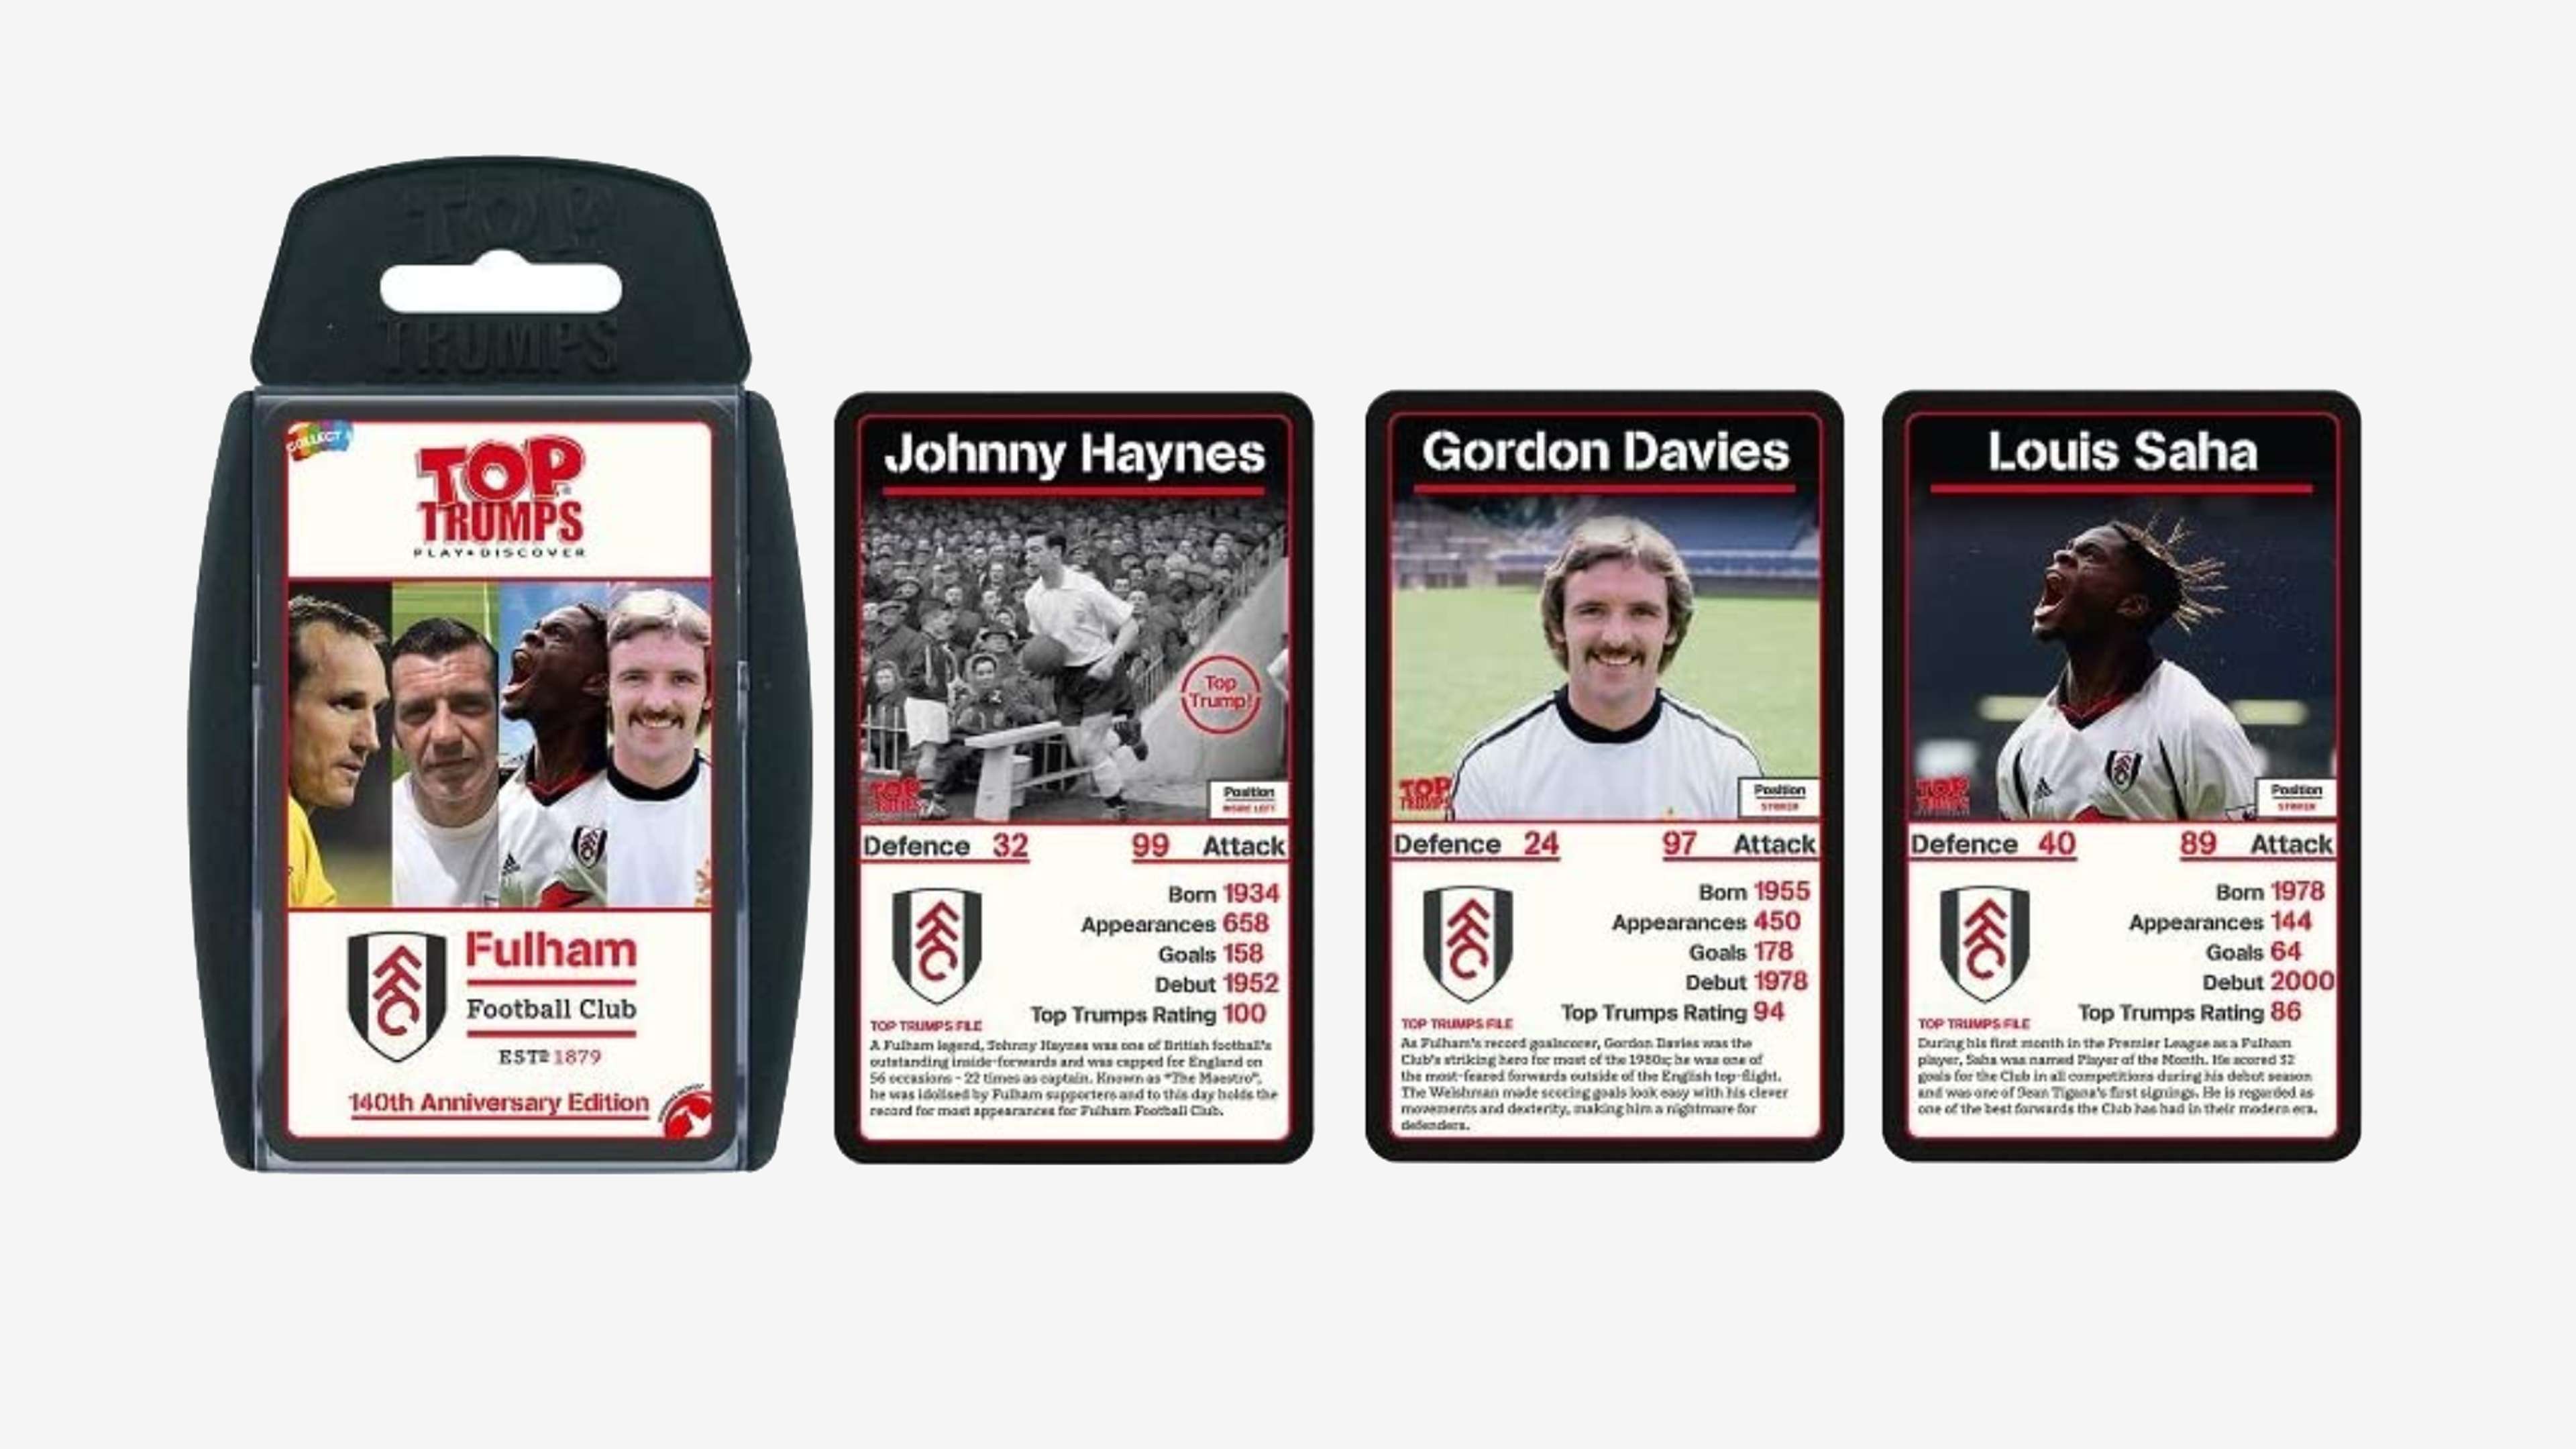 Fulham 140th anniversary Top Trumps cards